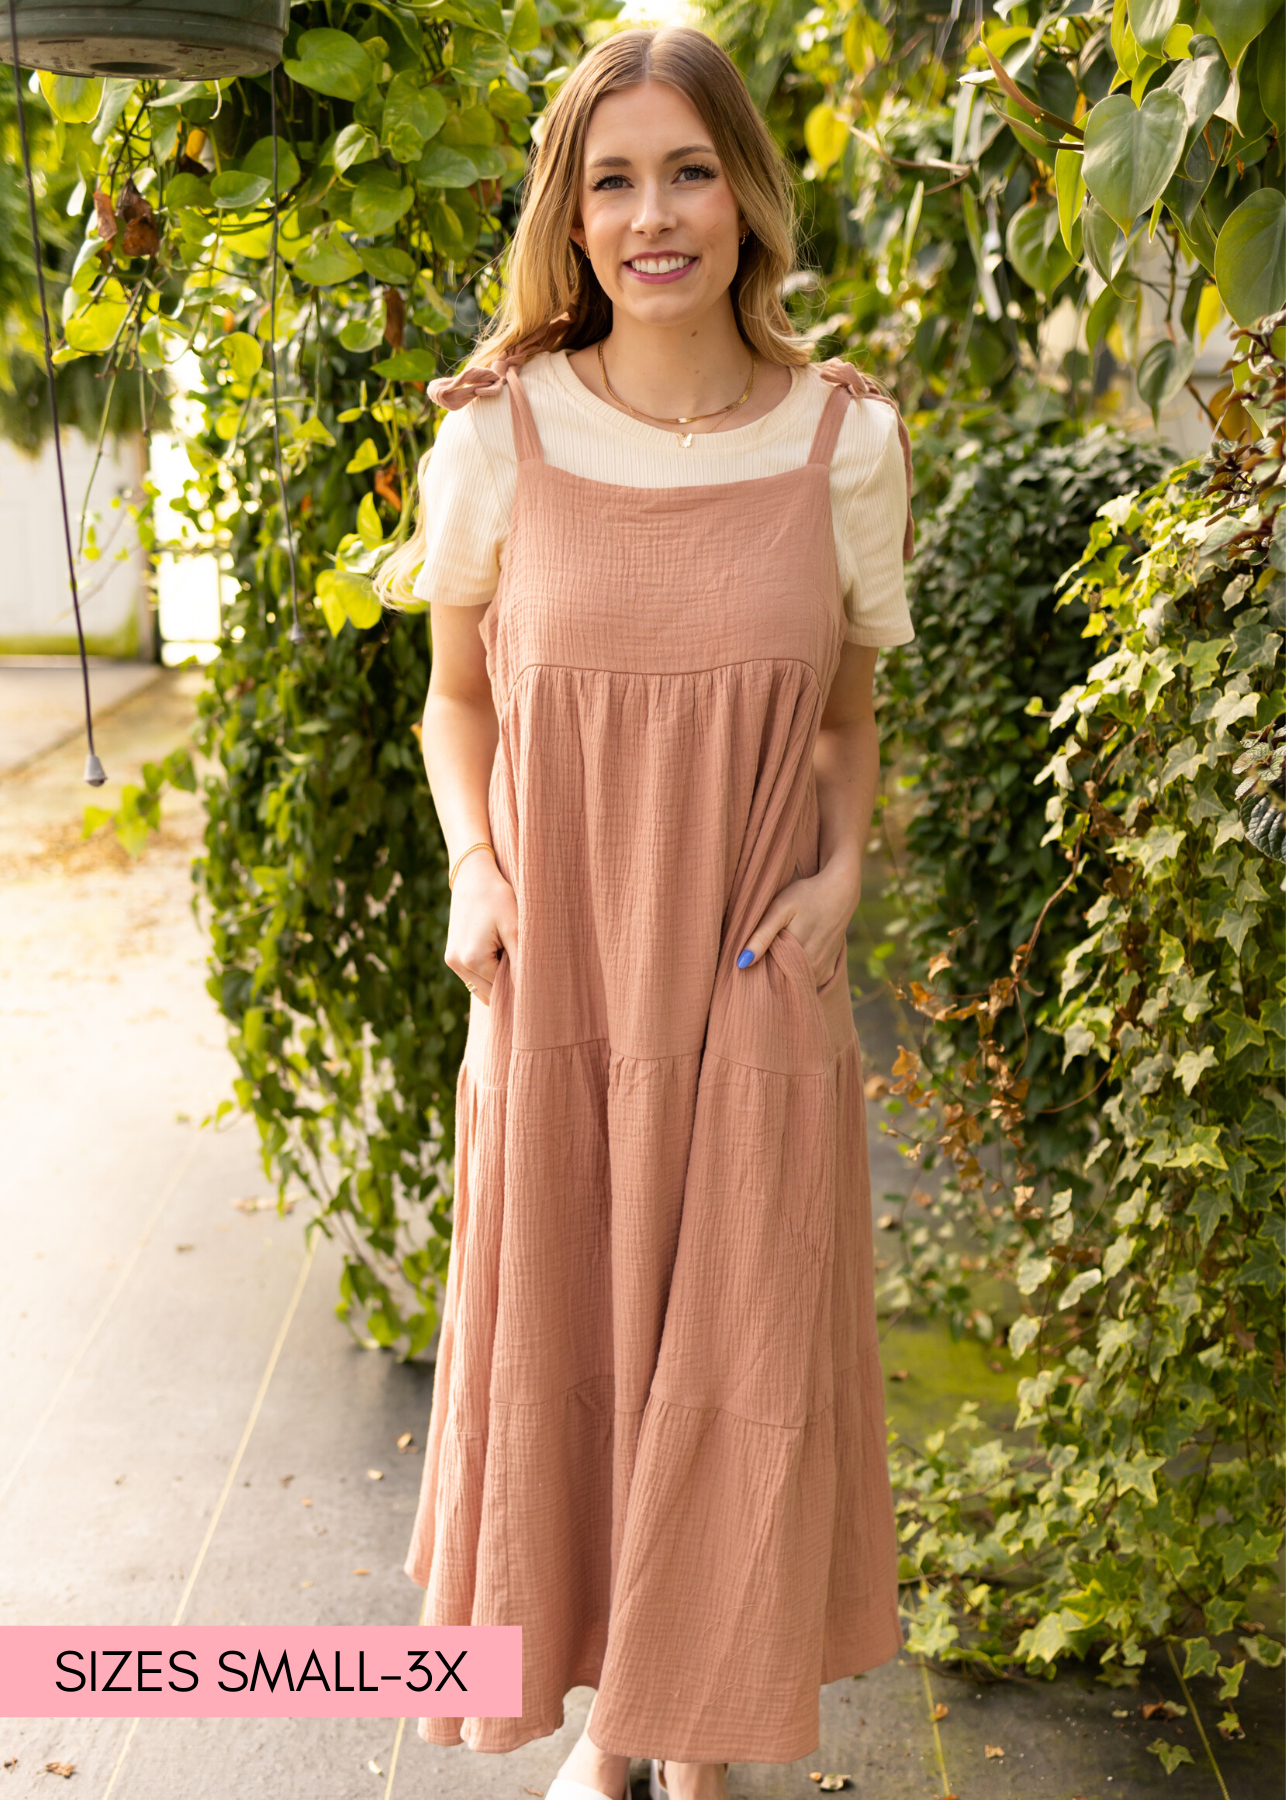 Clay jumper dress with pocket and ties at the shoulders